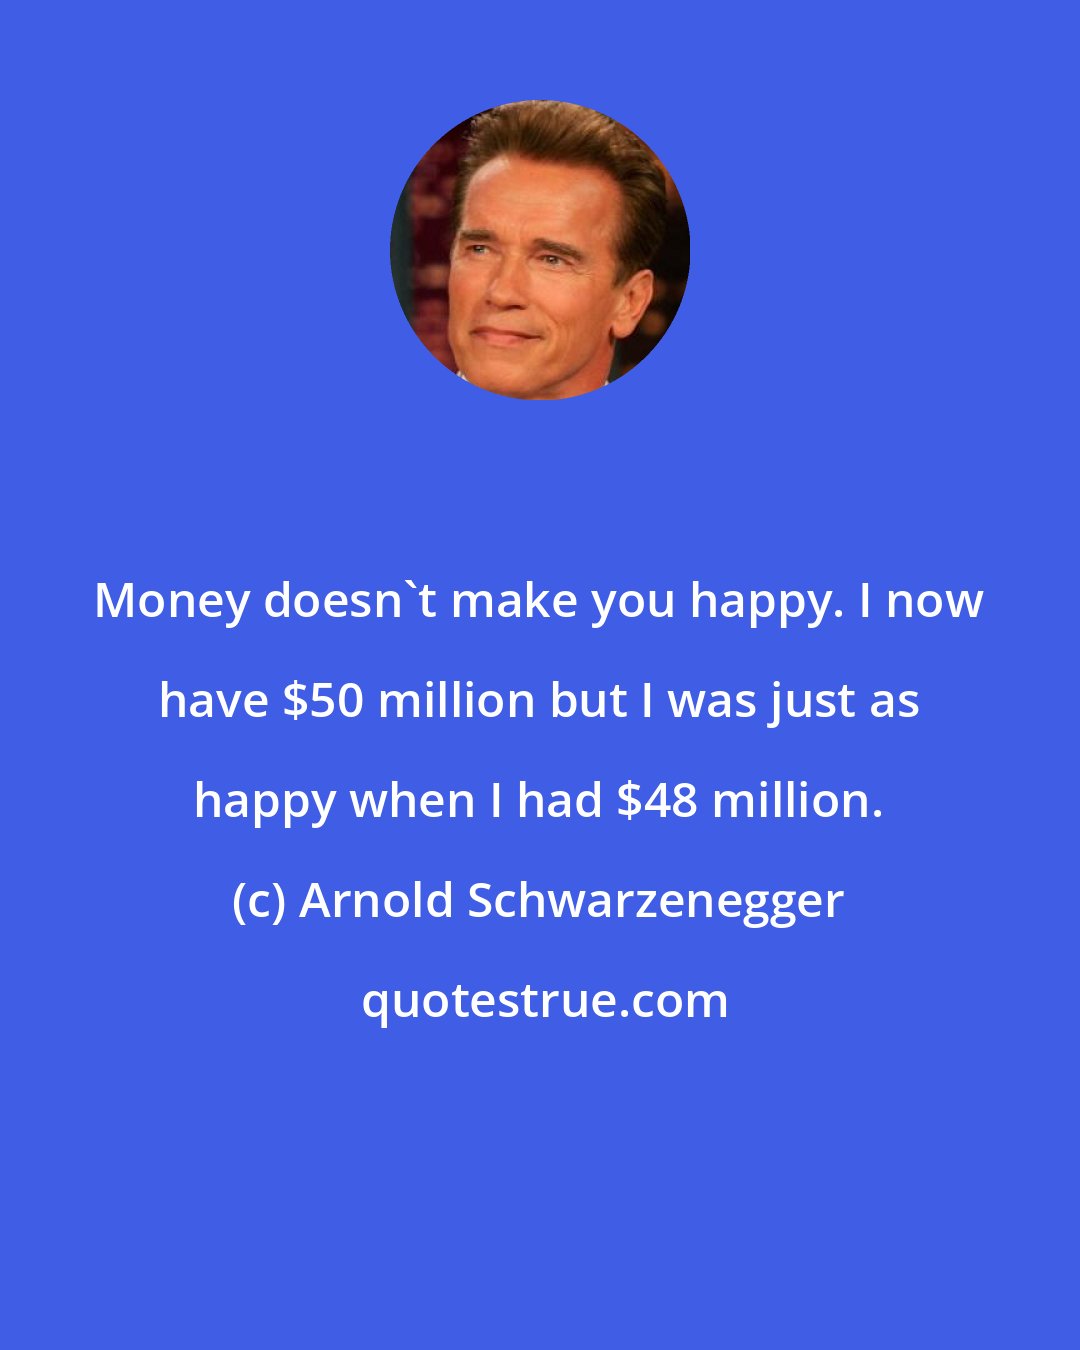 Arnold Schwarzenegger: Money doesn't make you happy. I now have $50 million but I was just as happy when I had $48 million.